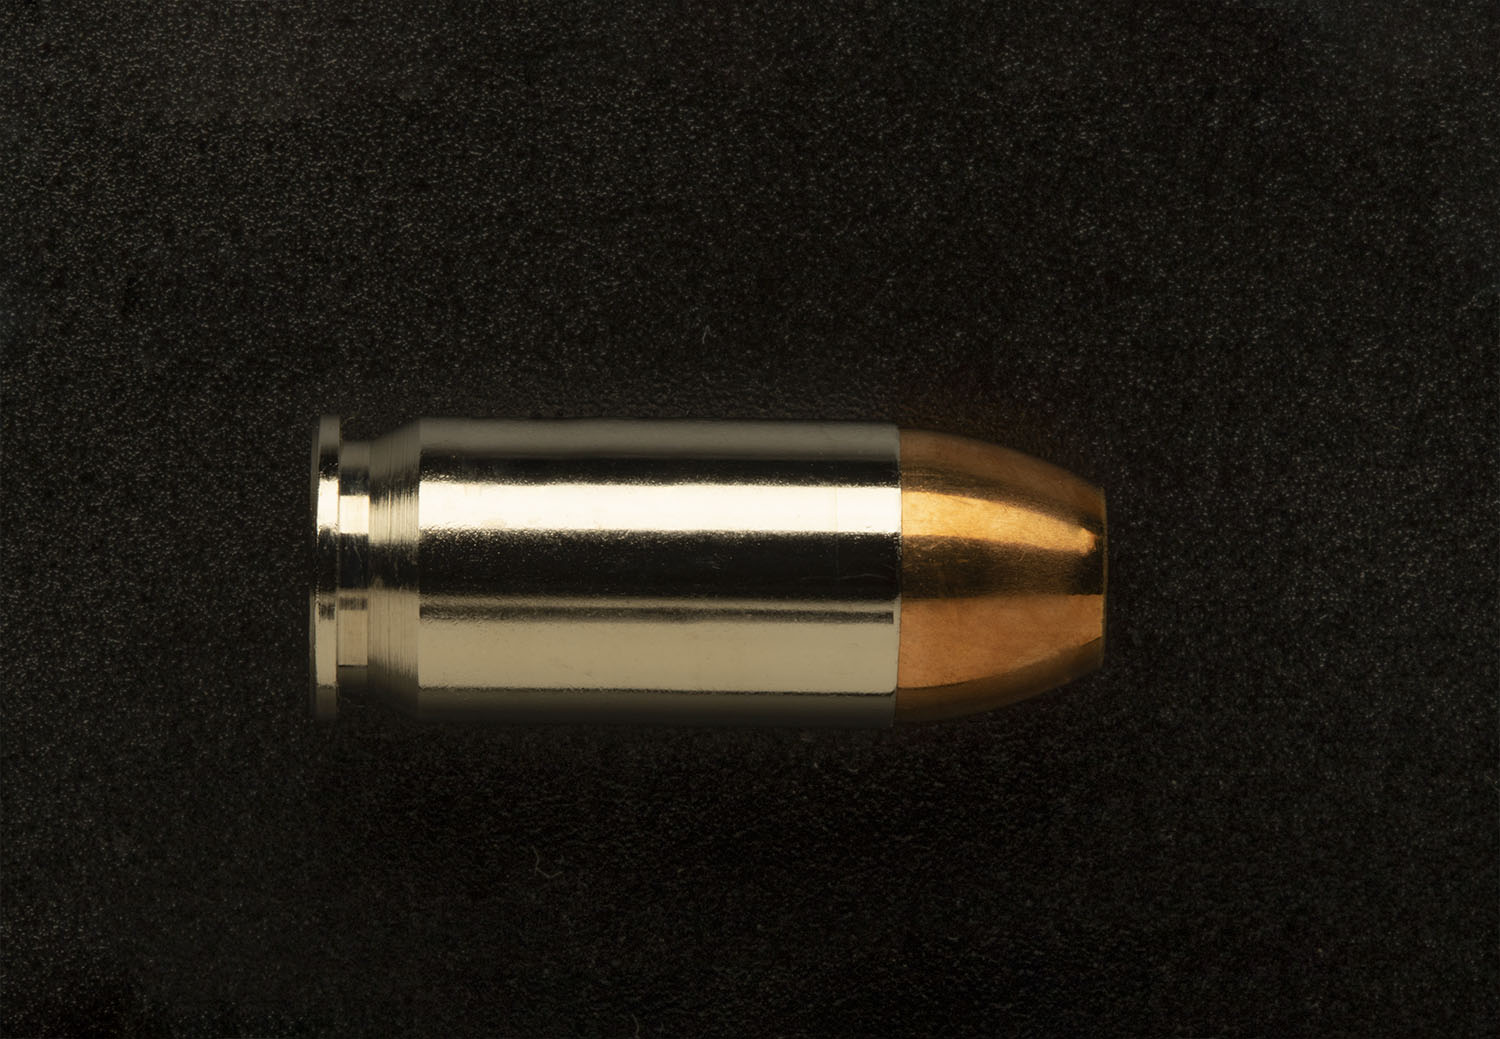 SIMX to help end ammo shortage